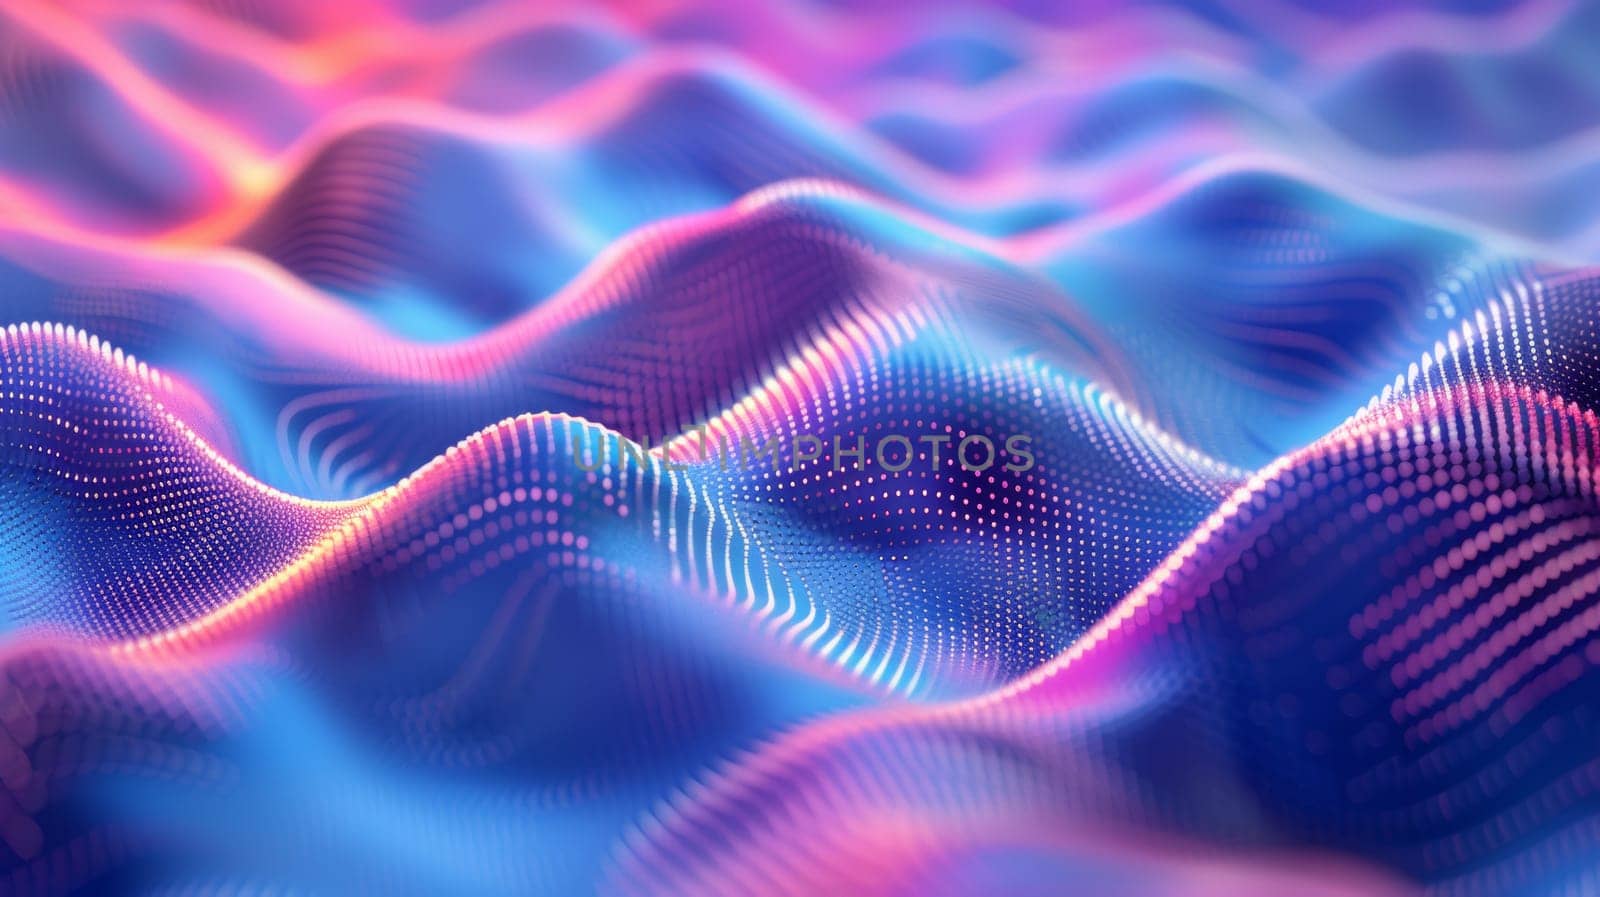 A close up of a colorful wavy pattern on the surface